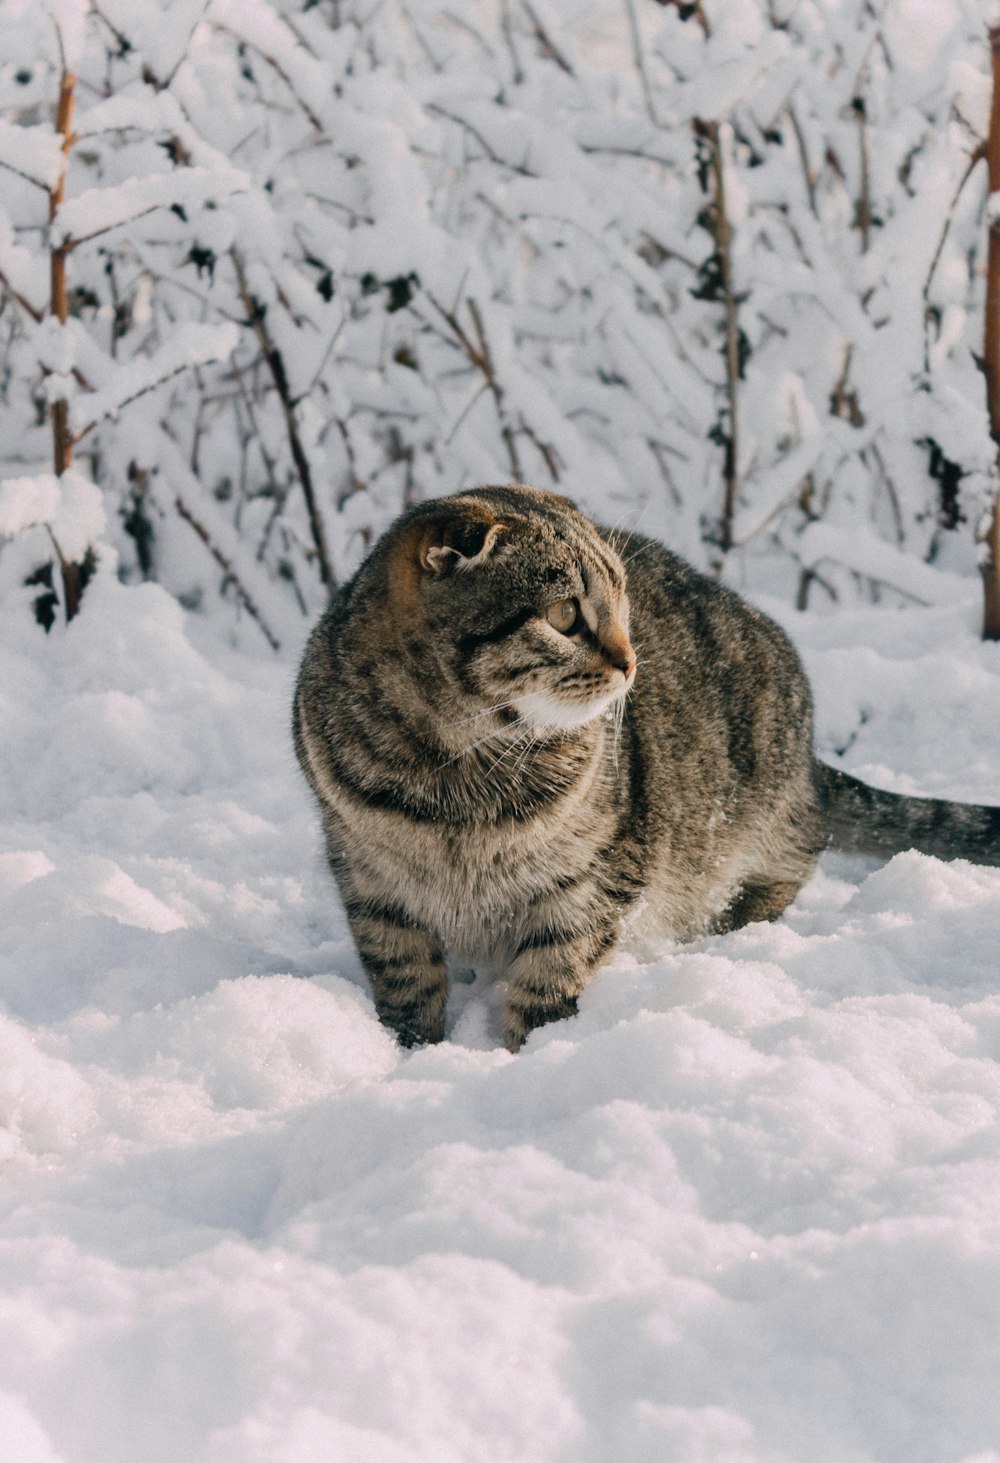 a cat walking through the snow in a wooded area